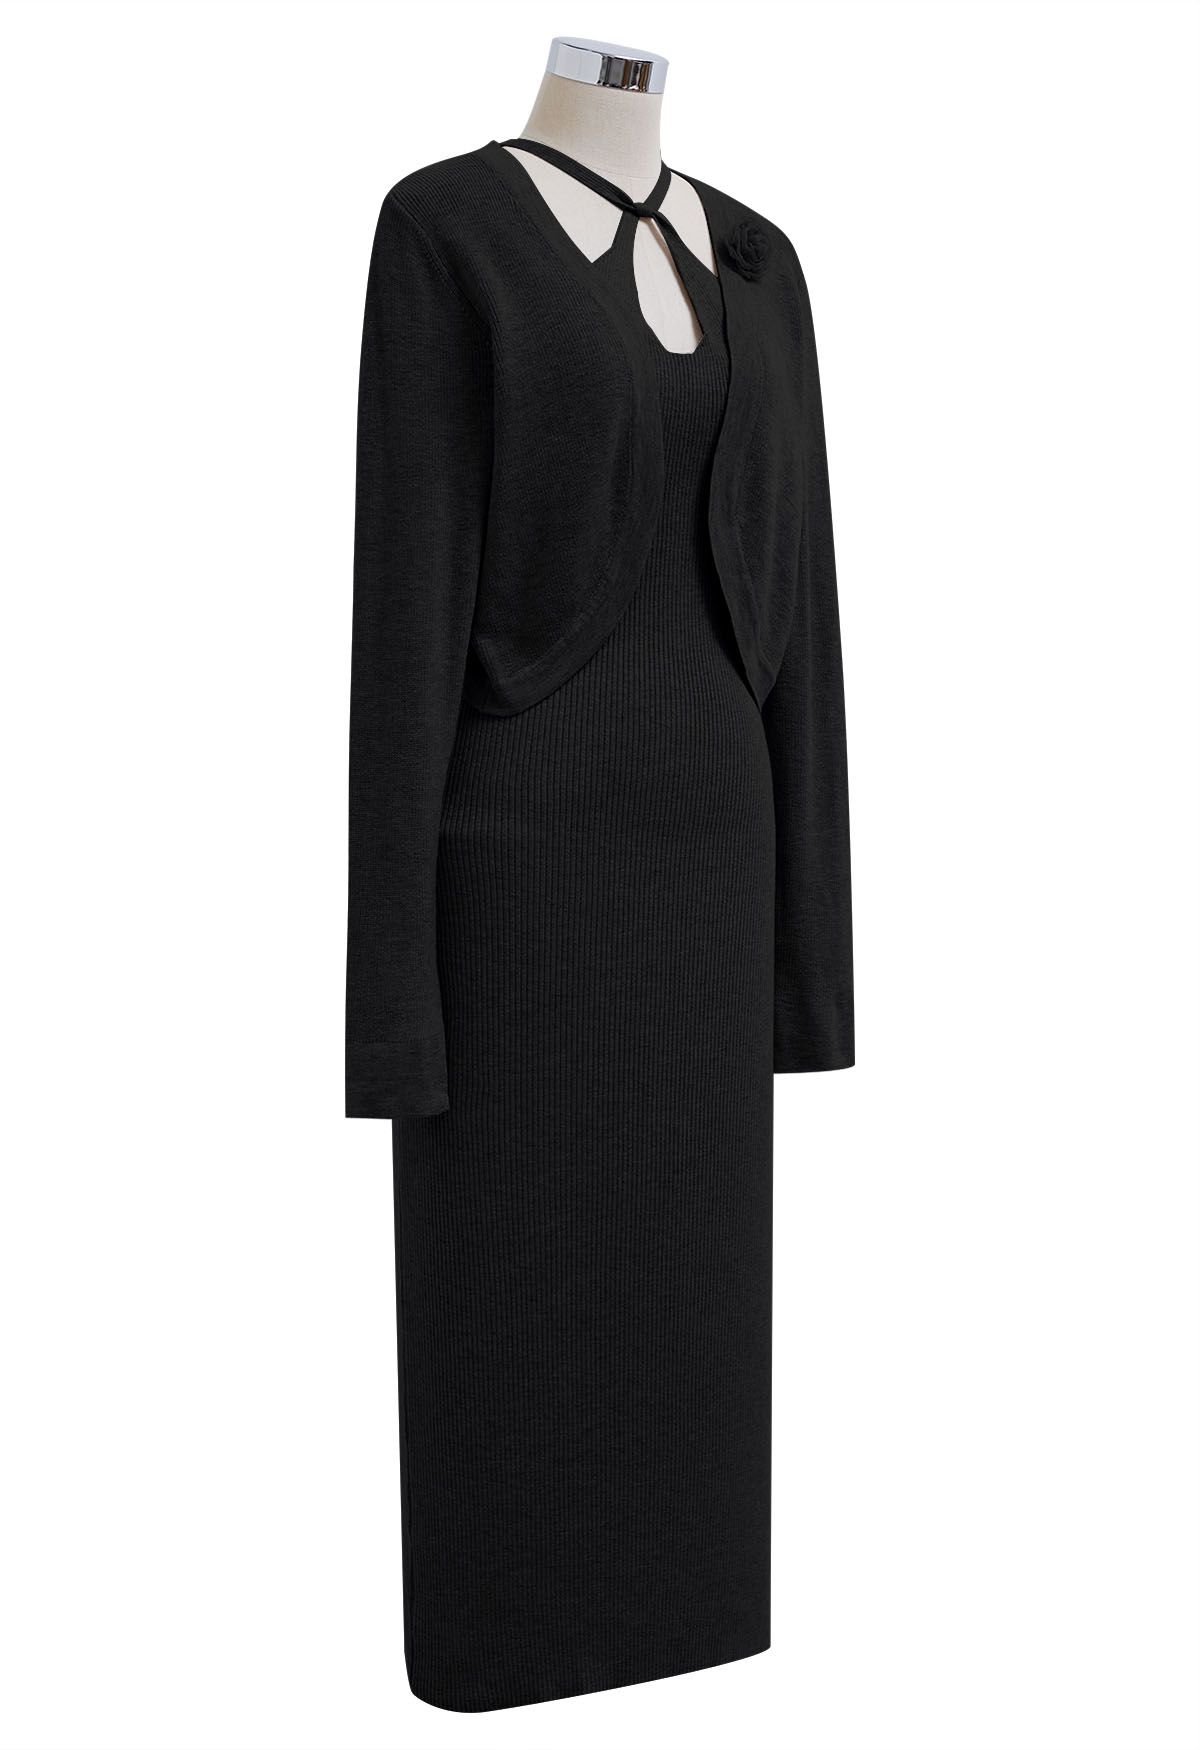 Cutout Halter Neck Knit Dress and Cardigan Set in Black